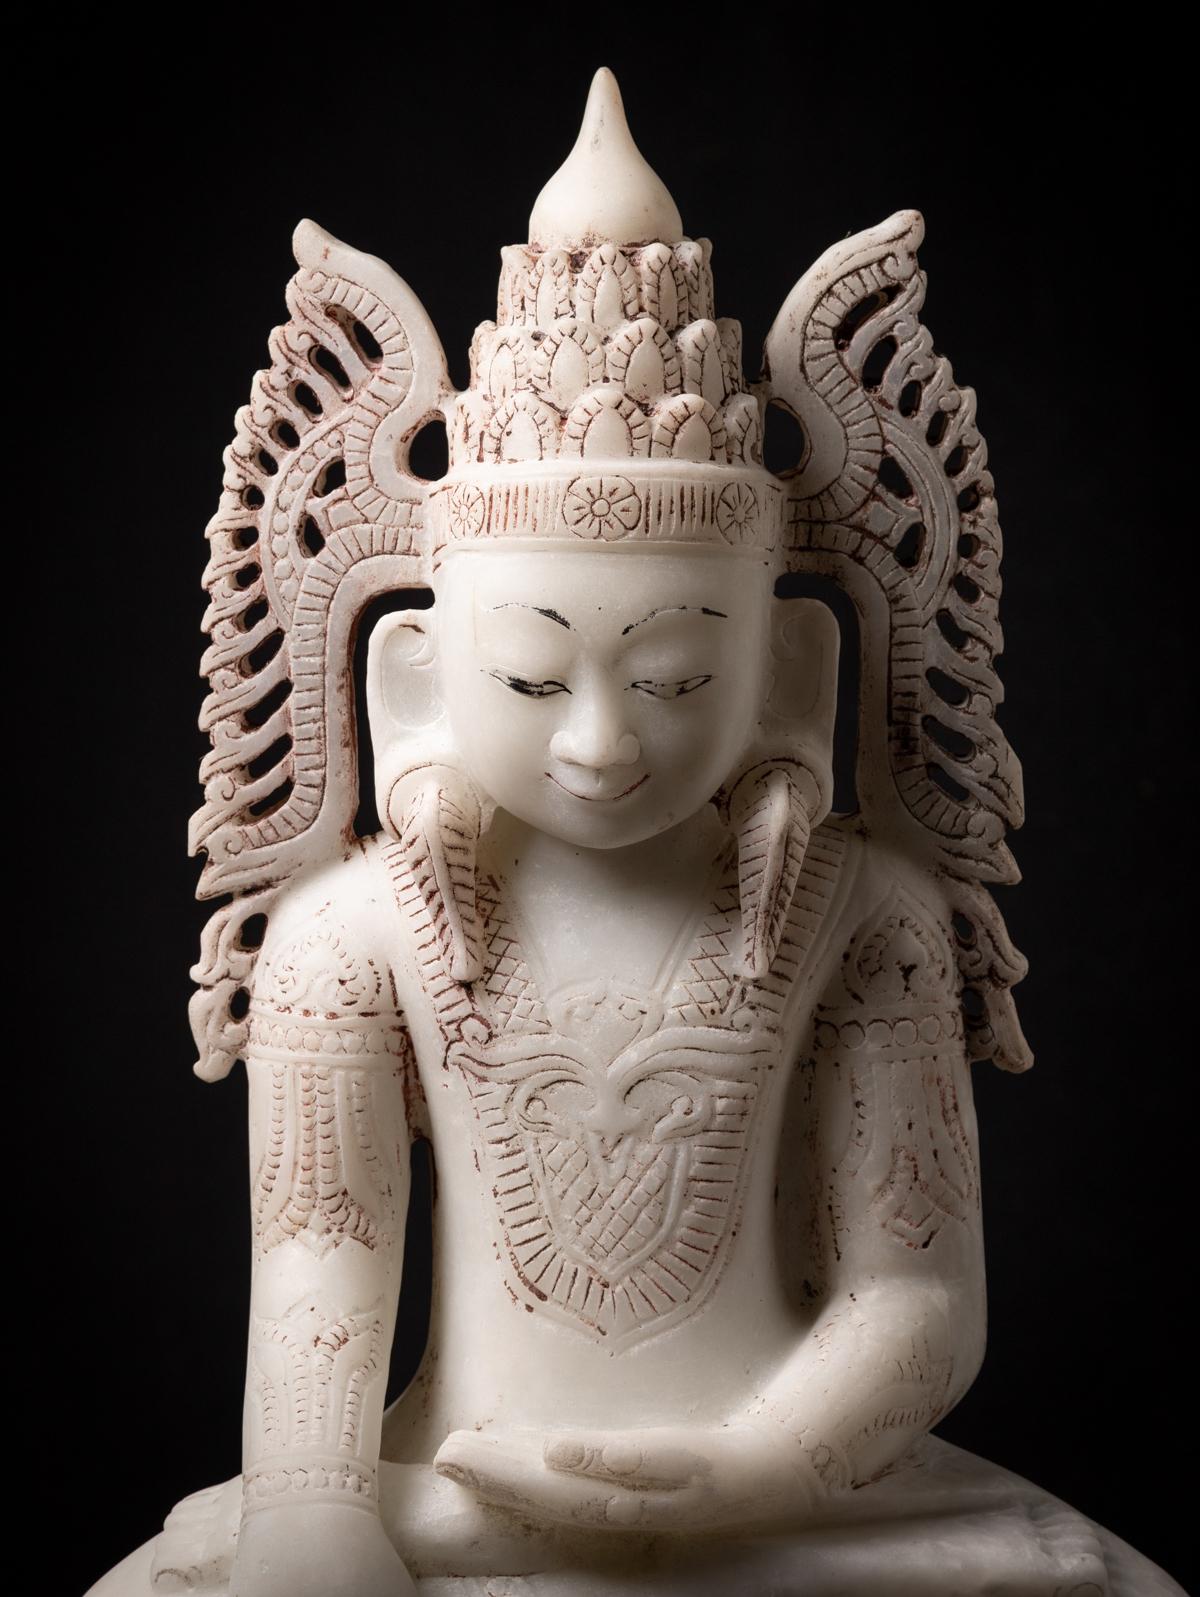 Material : marble
70 cm high
39,5 cm wide and 18,5 cm deep
Shan (Tai Yai) style
Bhumisparsha mudra
Late 19th / early 20th century
In beautiful quality, not easy to find Buddha statues in this size and quality !
Can be shipped worldwide
Weight: 42,7